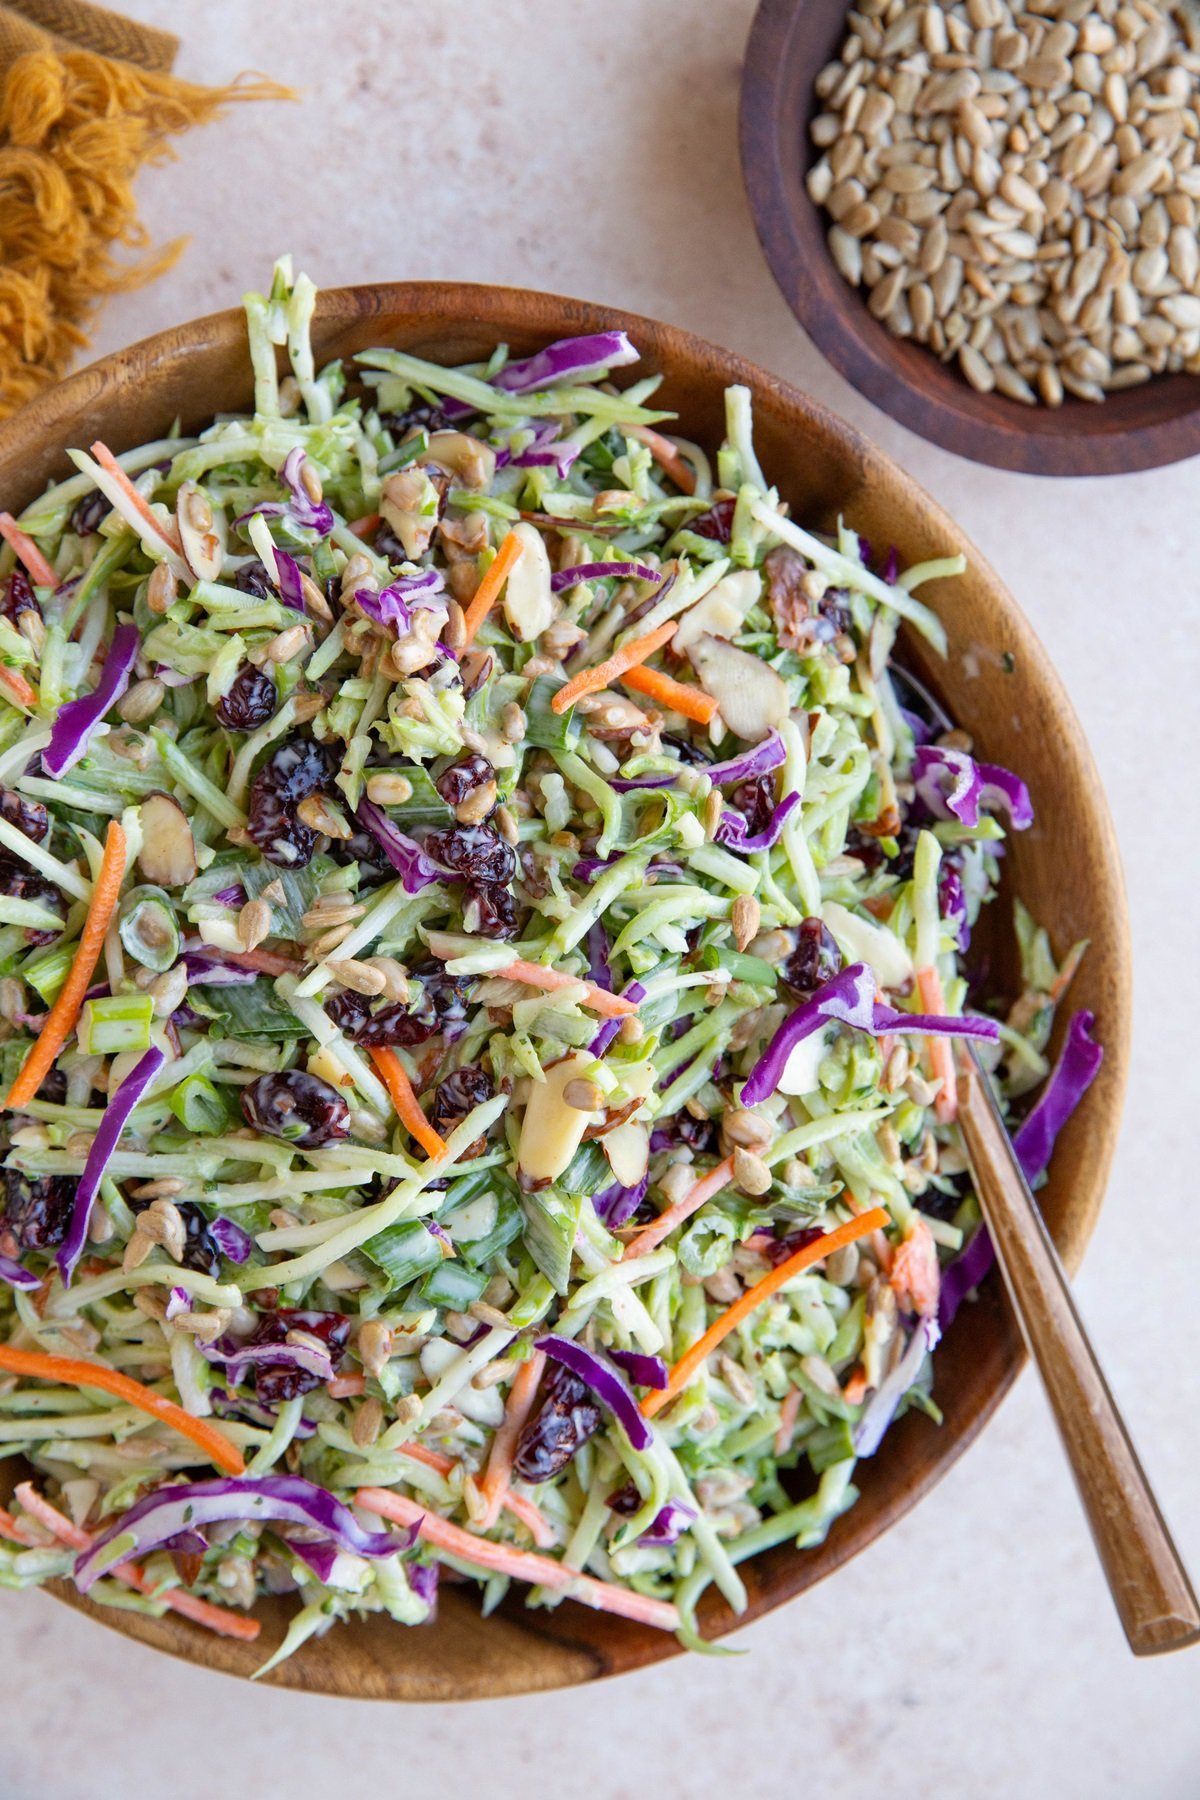 Broccoli coleslaw in a large wooden bowl, ready to serve.